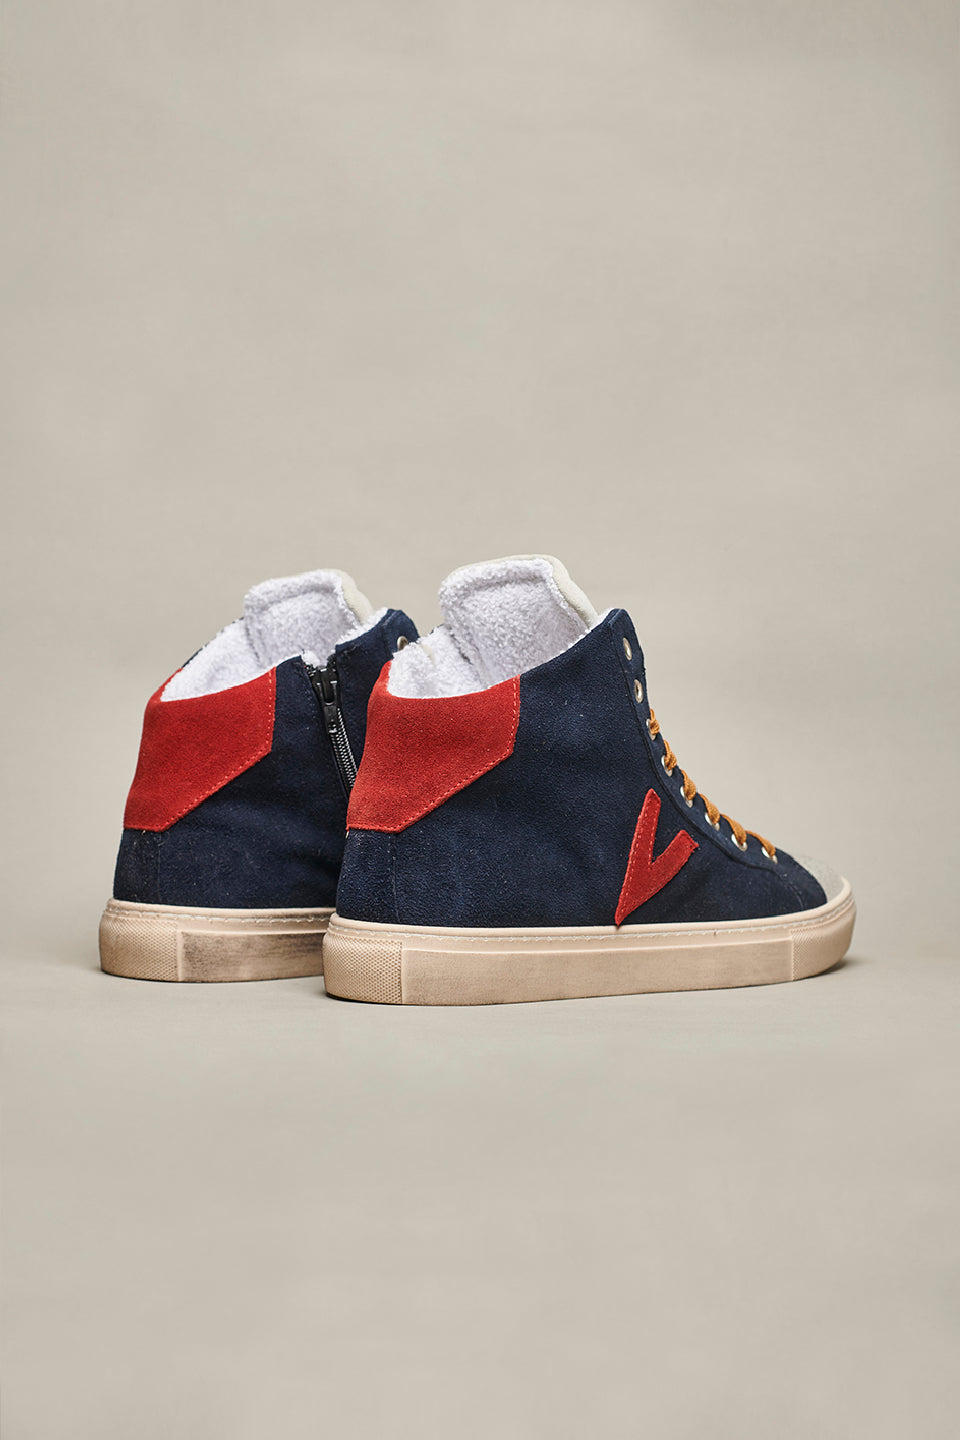 OLYMPIC MID- Blue high sneakers with red back and insert